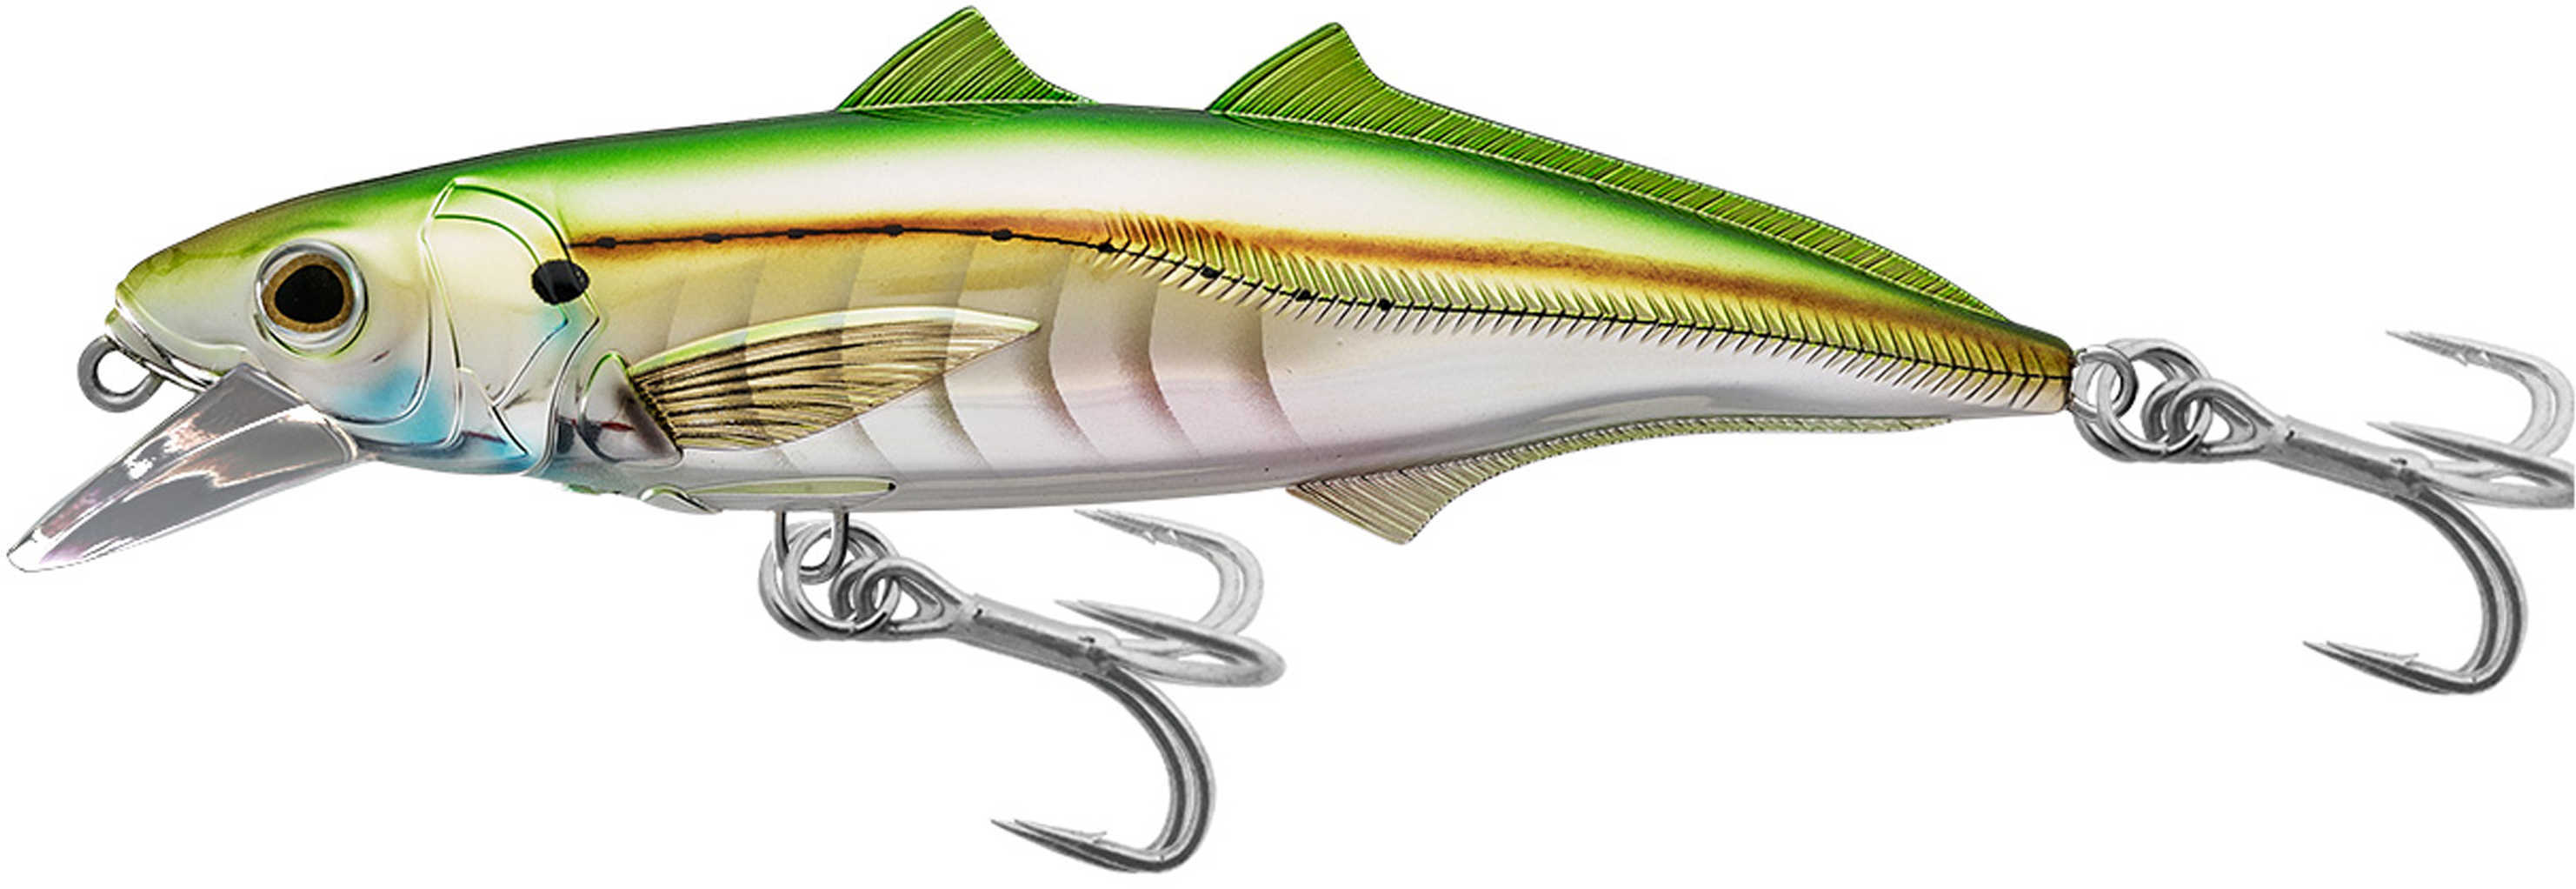 LIVETARGET Lures / Koppers Fishing and Tackle Corp Cigar Minow Jerkbait 4 1/2" Number 1/0 Hook Size 2-4 Depth Pearl/Green Md: CMJ